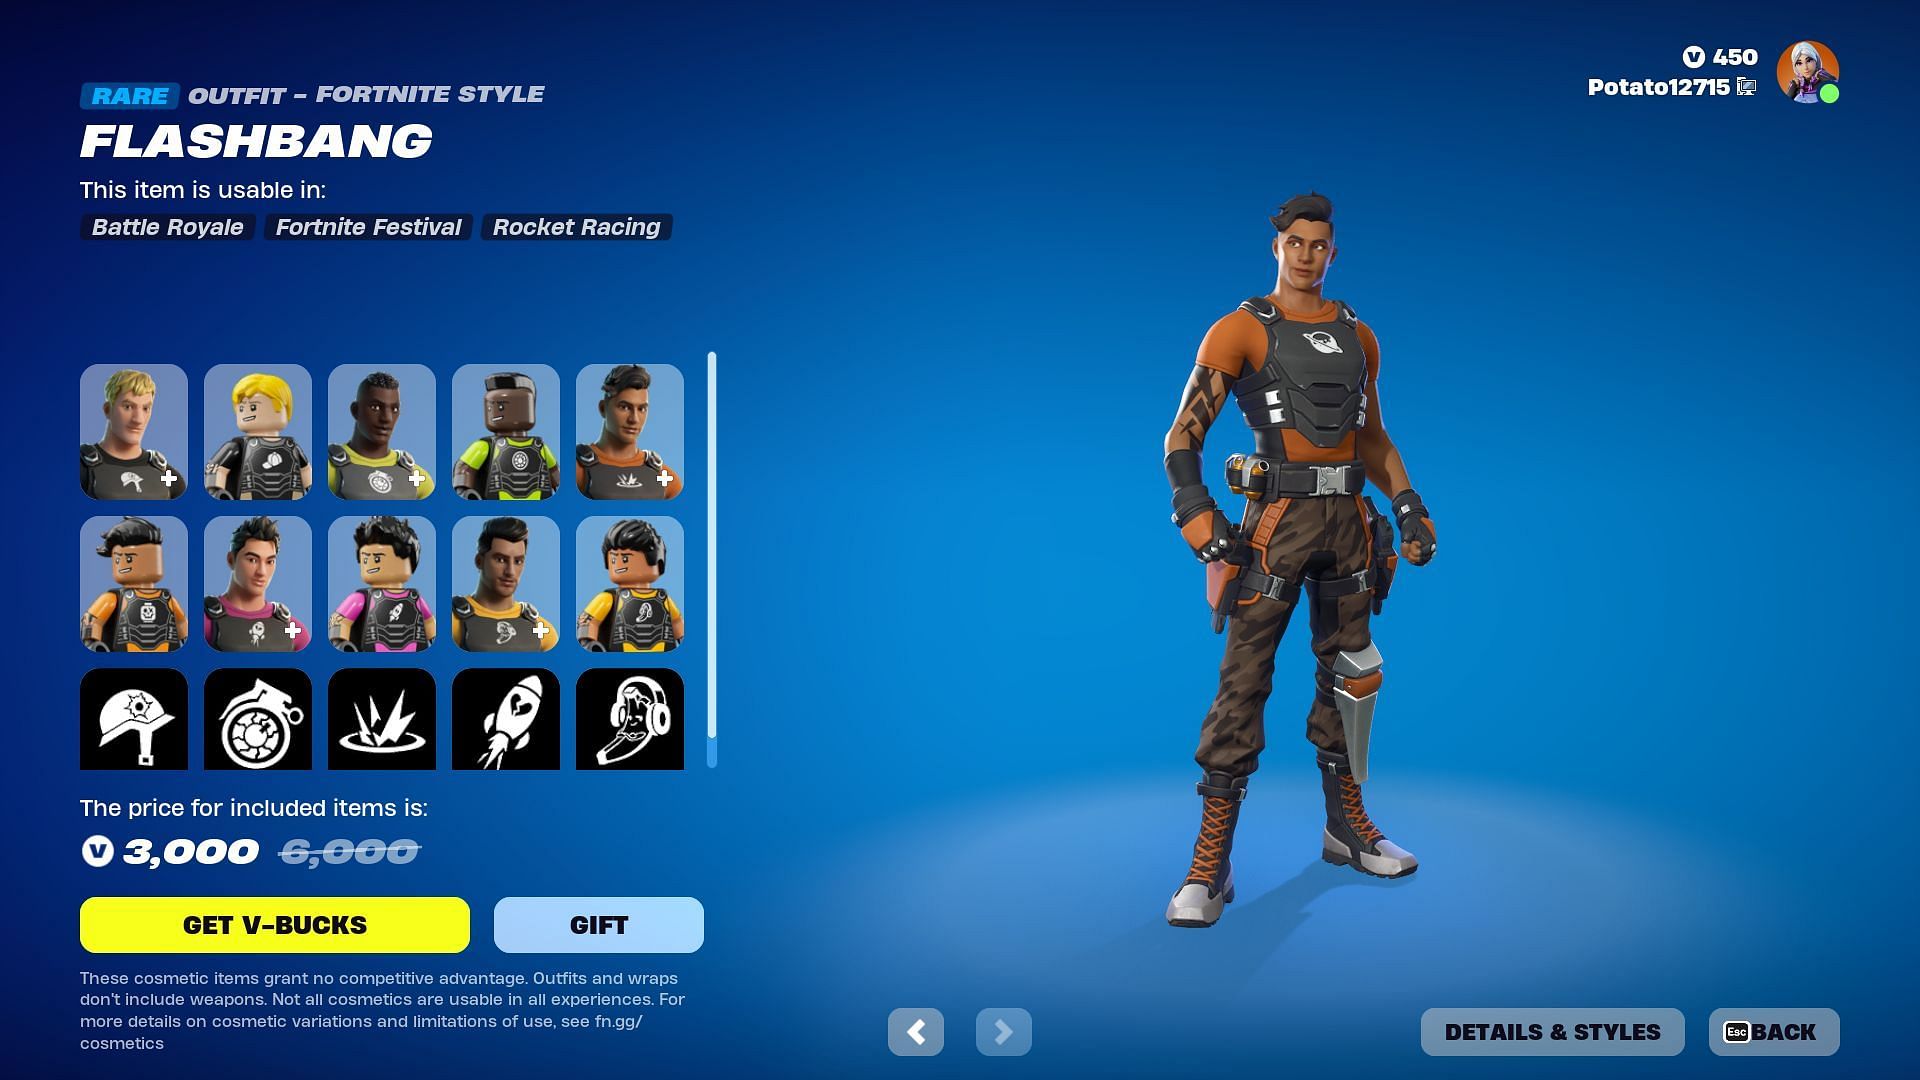 Skratch Company Rangers Bundle is listed in the Item Shop (Image via Epic Games)